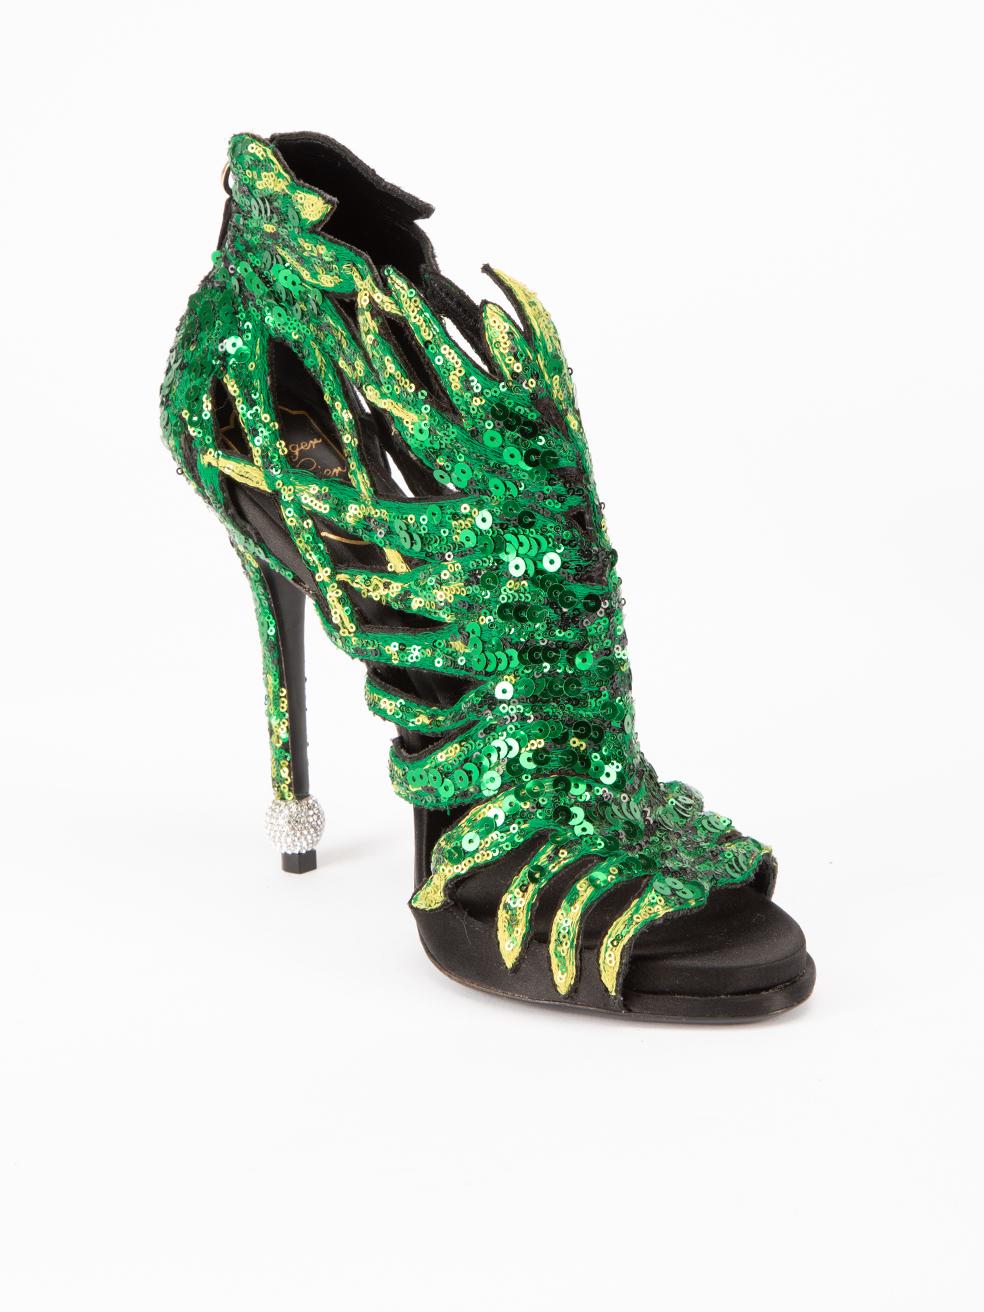 CONDITION is Very good. Minimal wear to heels is evident. Minimal wear to the exterior sequins on this used Roger Vivier designer resale item. This item includes the original dustbag.
 
 Details
  Green
 Sequin
 Sandals
 Peep toe
 High heel
 Silver